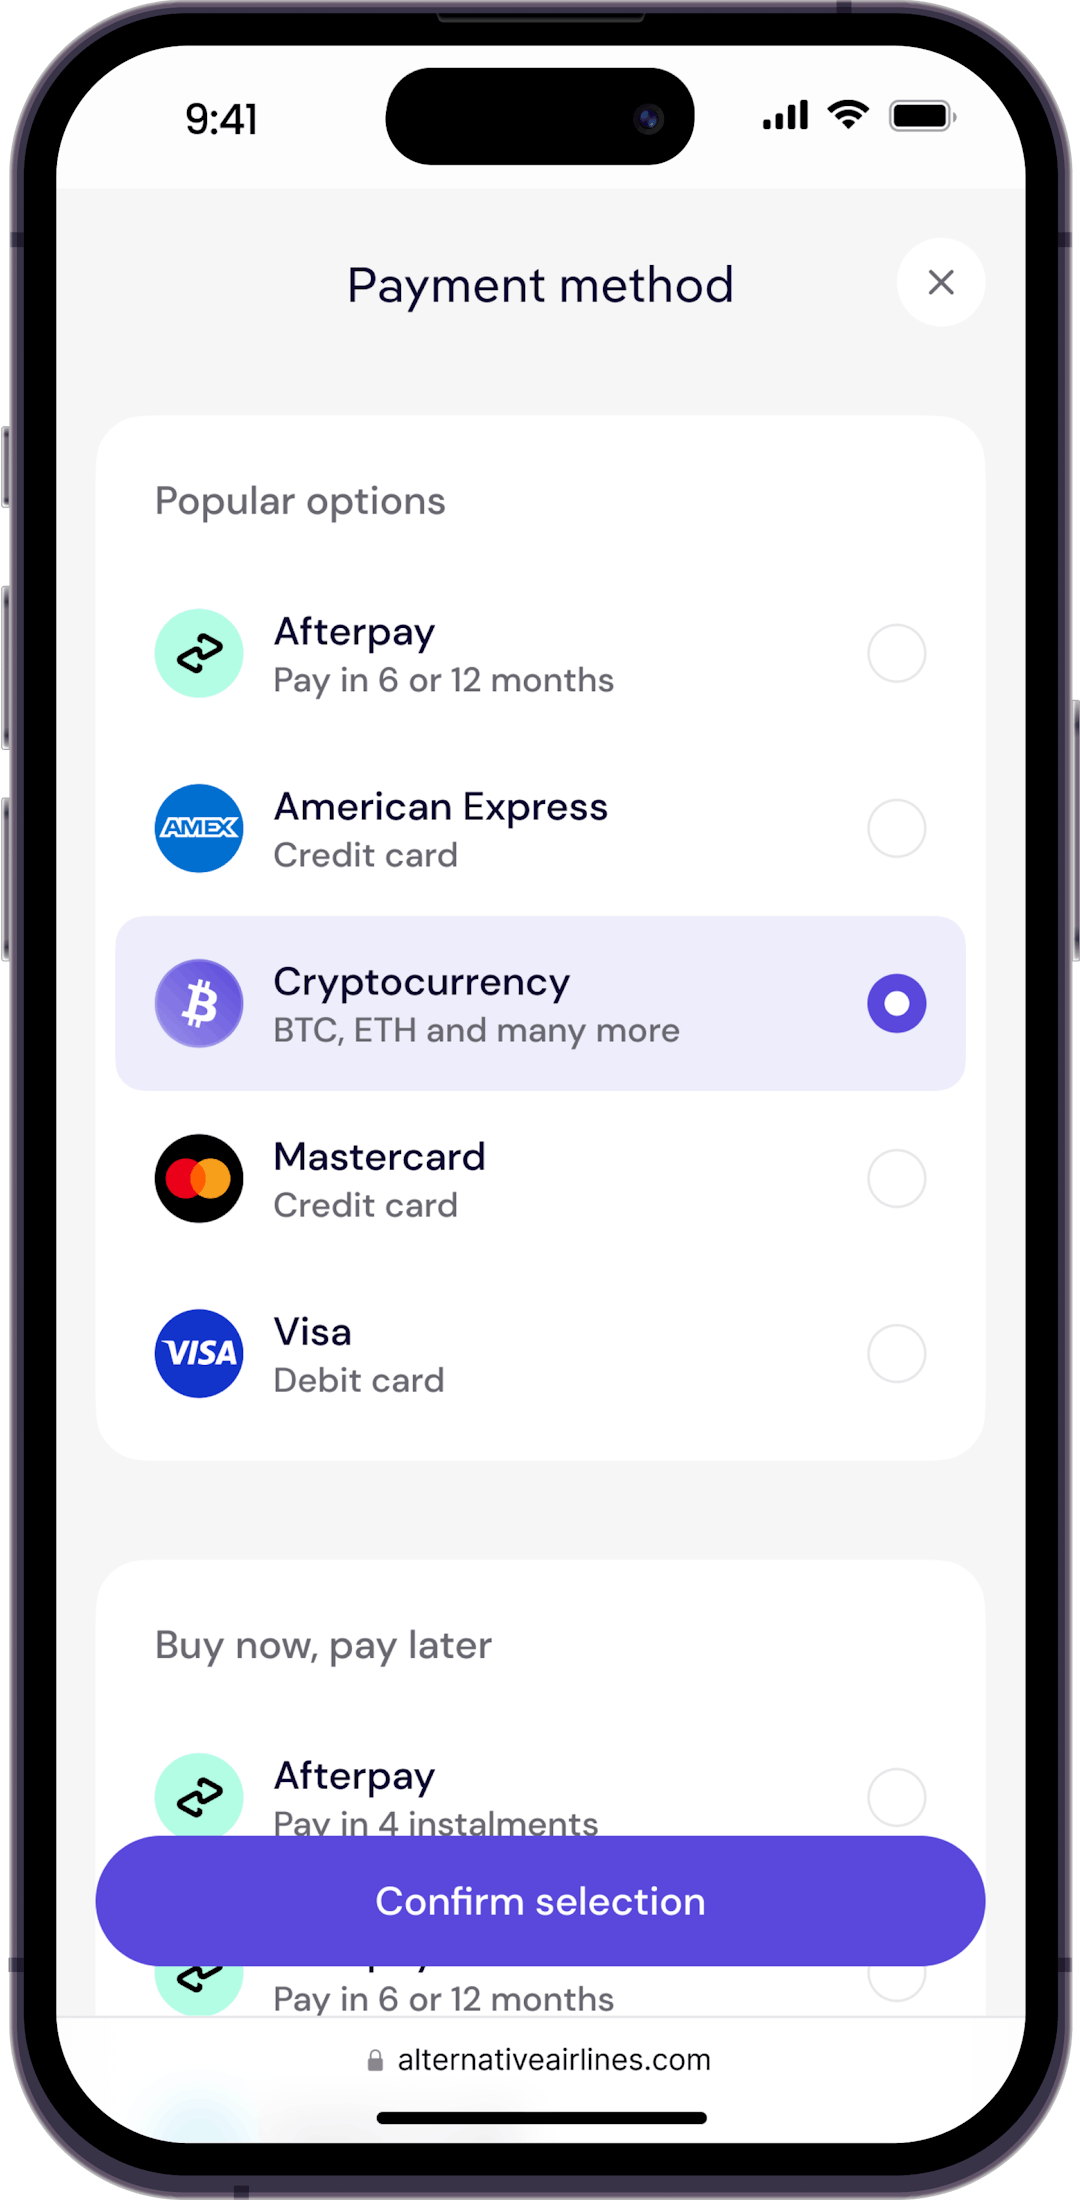 Step 2 - Select cryptocurrency as payment method